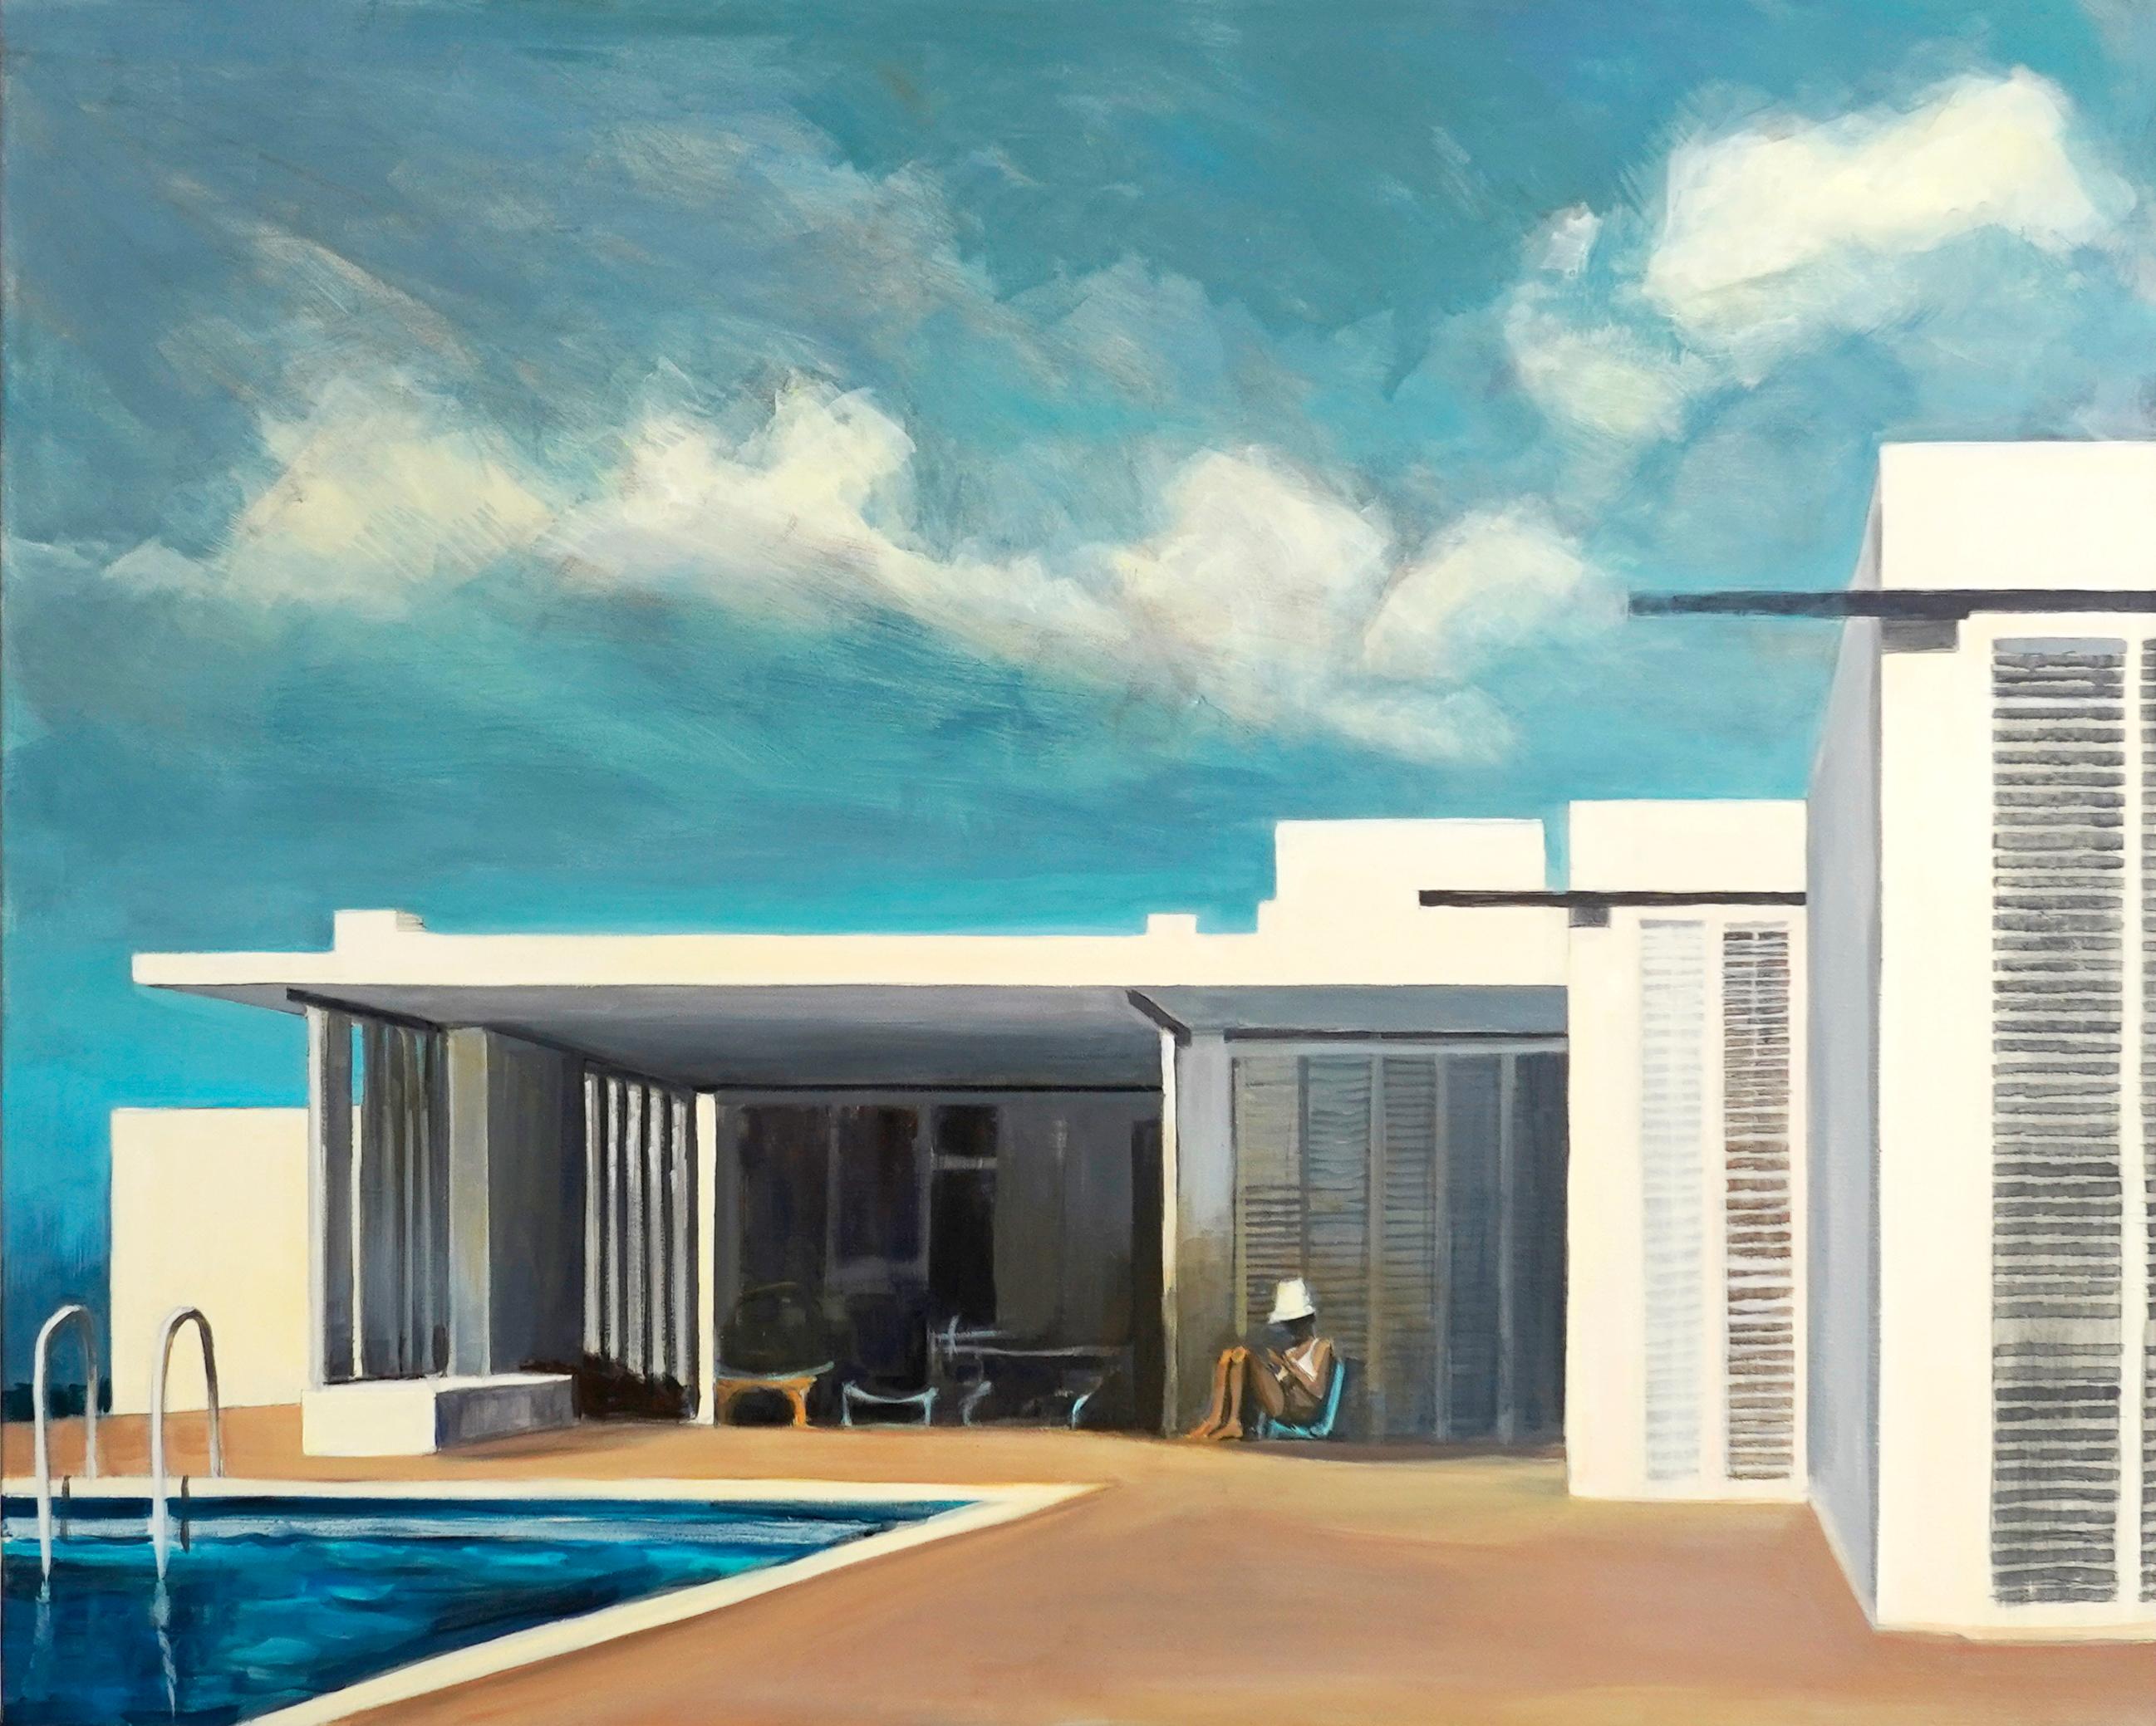 Siesta in the Swimming Pool
José Antonio Coderch architect
Acrylic on linen
81x100 cm 

The artist, Bea Sarrias, has developed much of her work in Barcelona, where she studied Fine Arts and soon became interested in architecture and the portrayal of